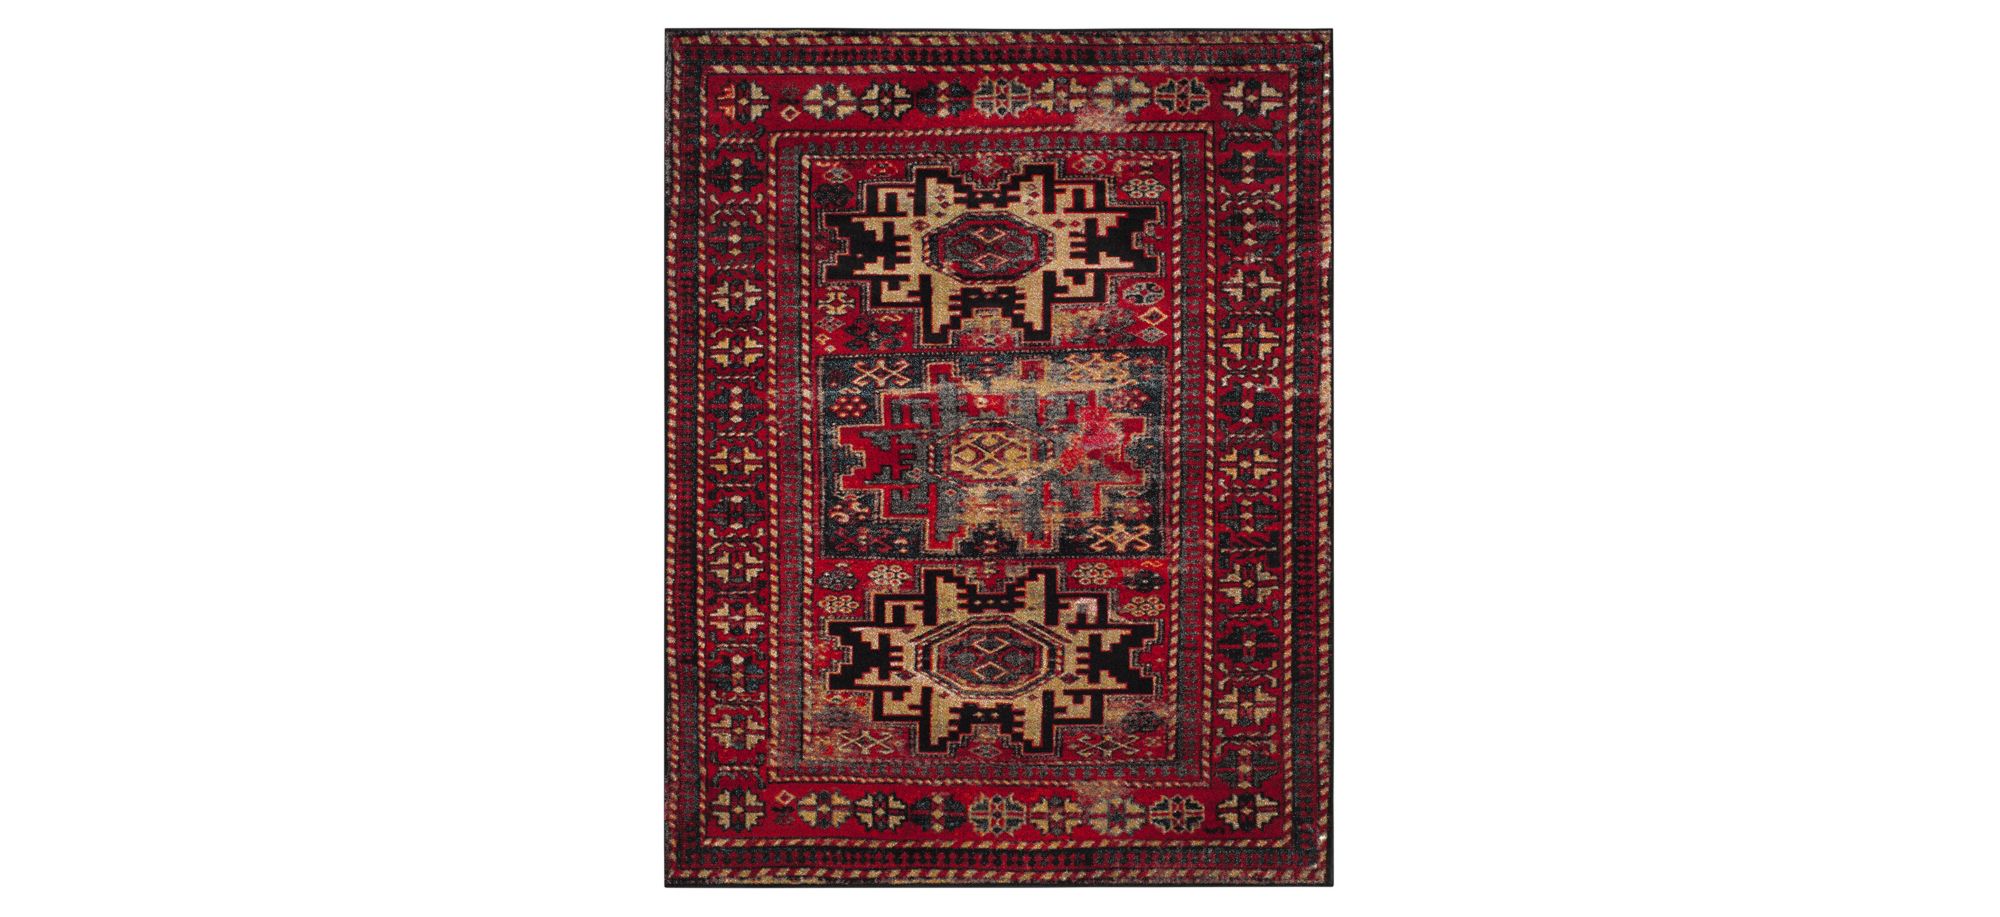 Zagros Red Area Rug in Red by Safavieh